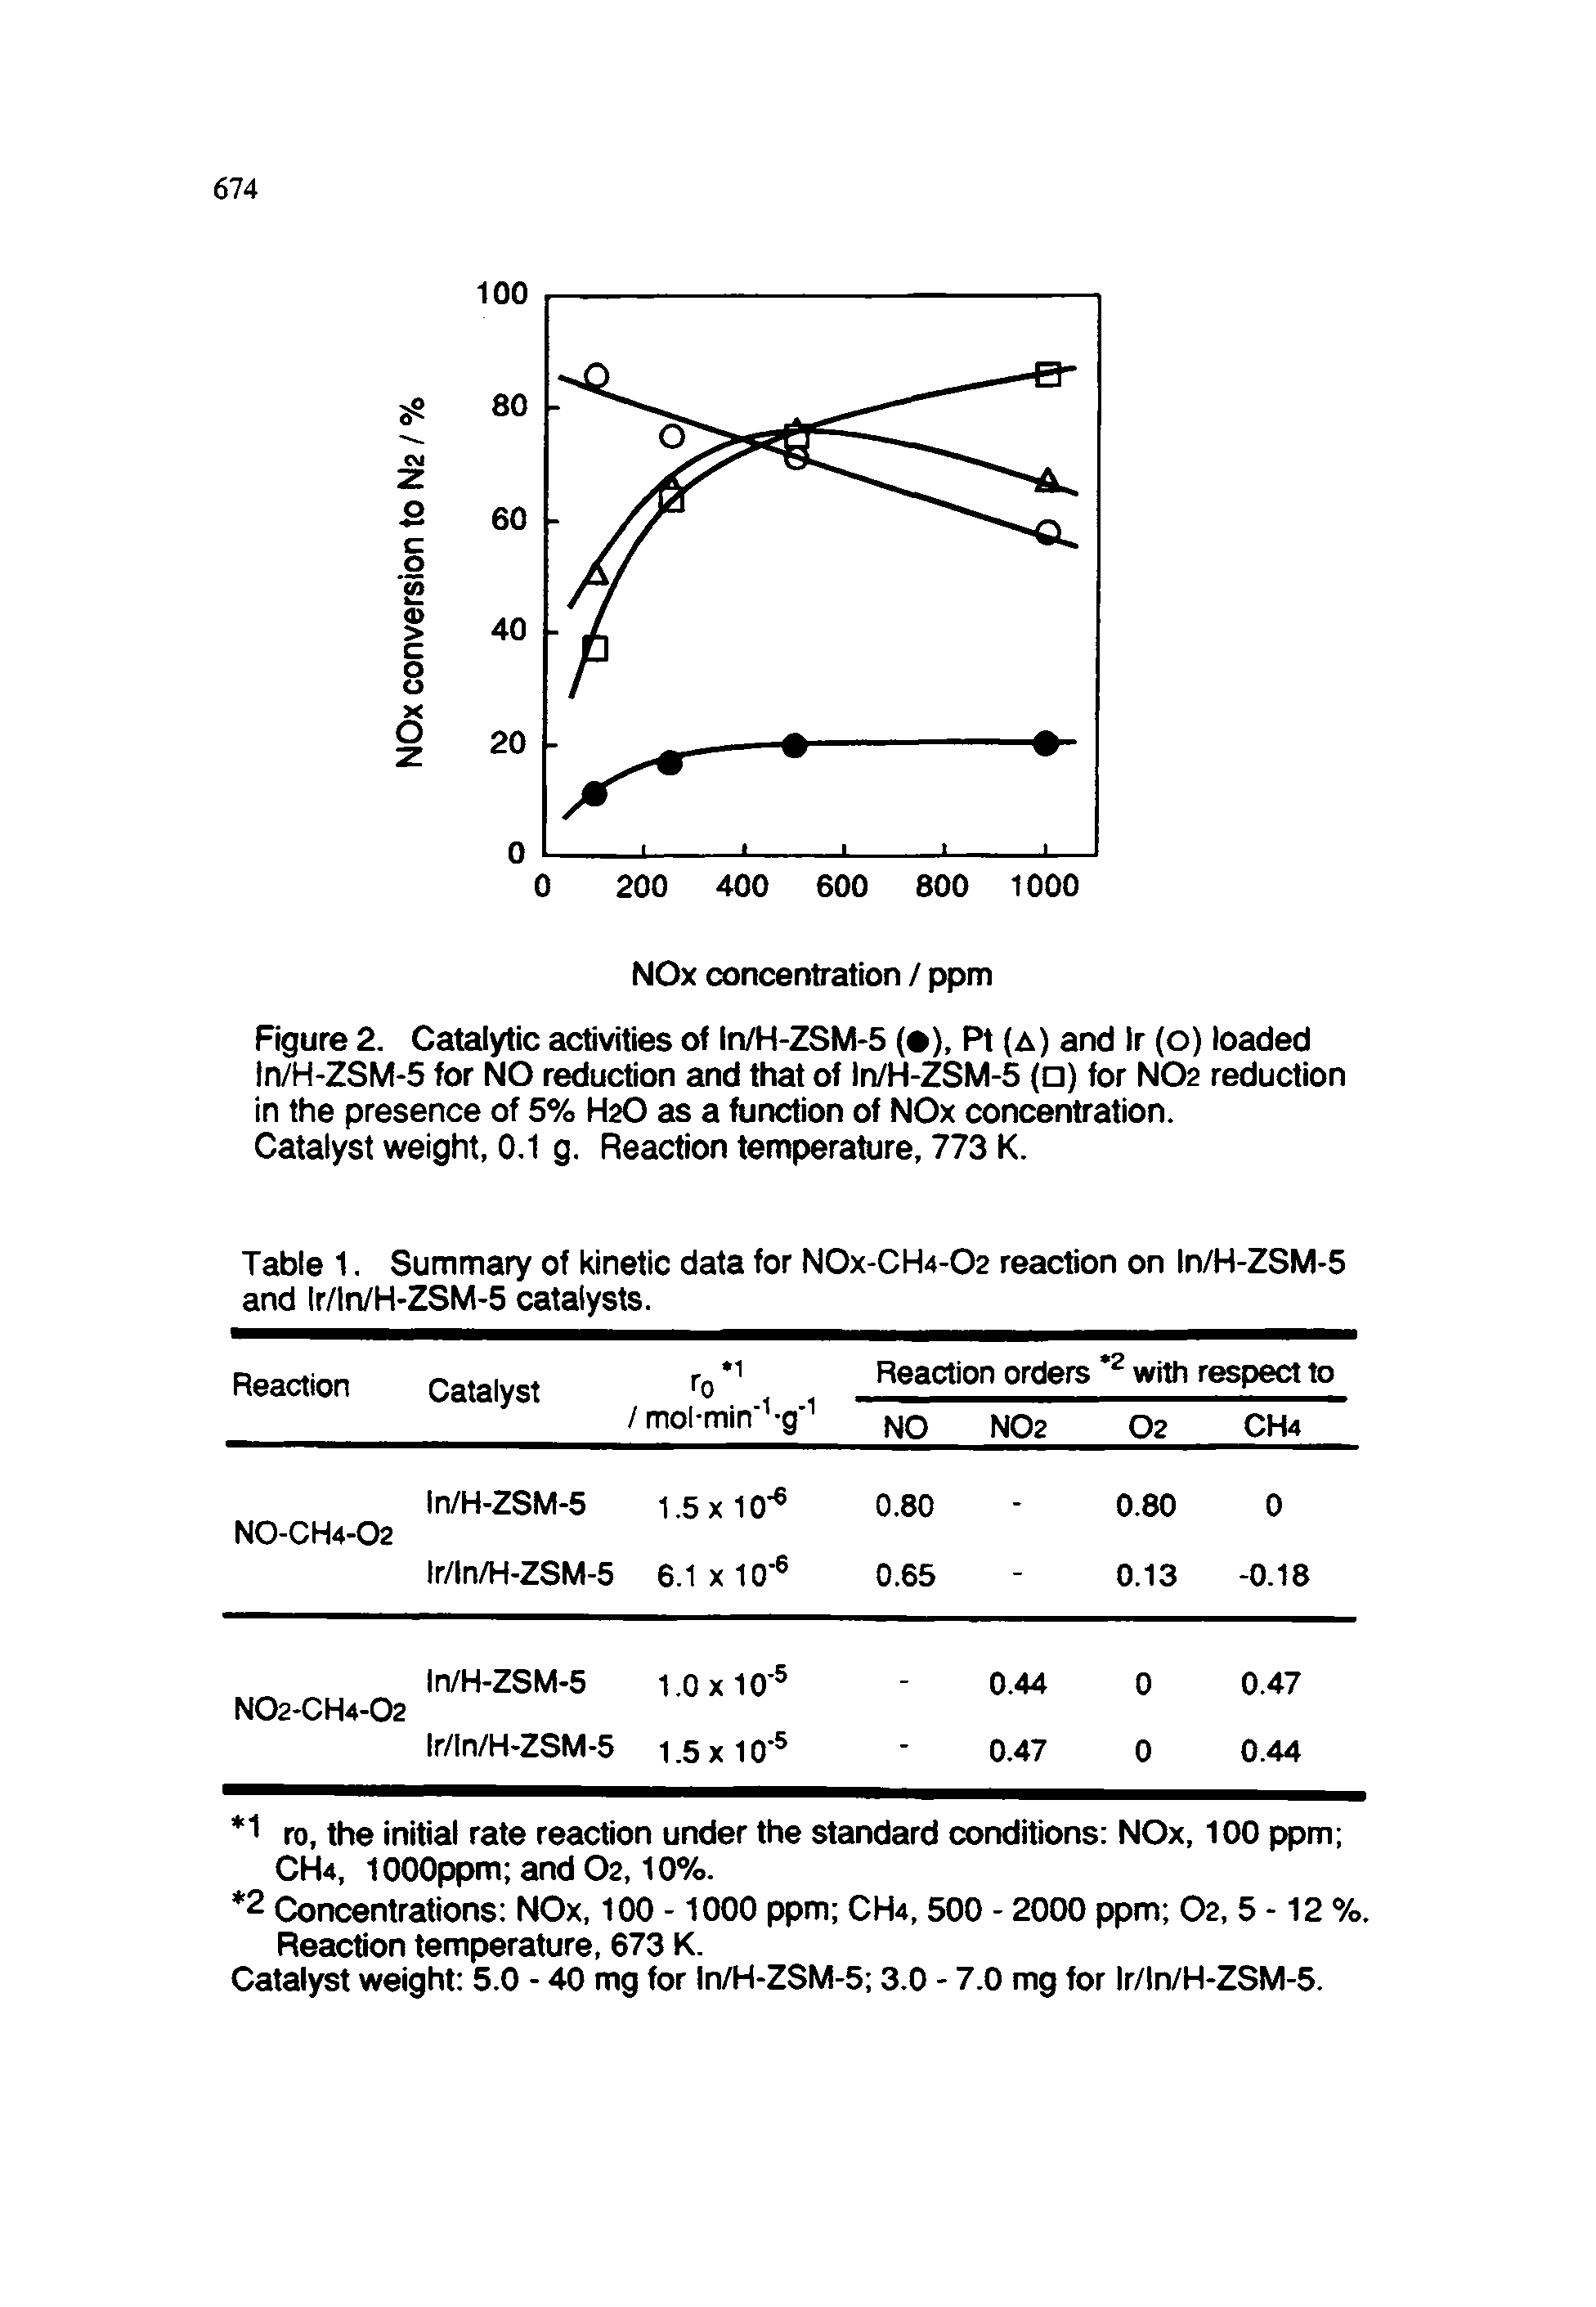 Table 1. Summary of kinetic data for NOX-CH4-O2 reaction on ln/H-ZSM-5 and lr/ln/H-ZSM-5 catalysts.